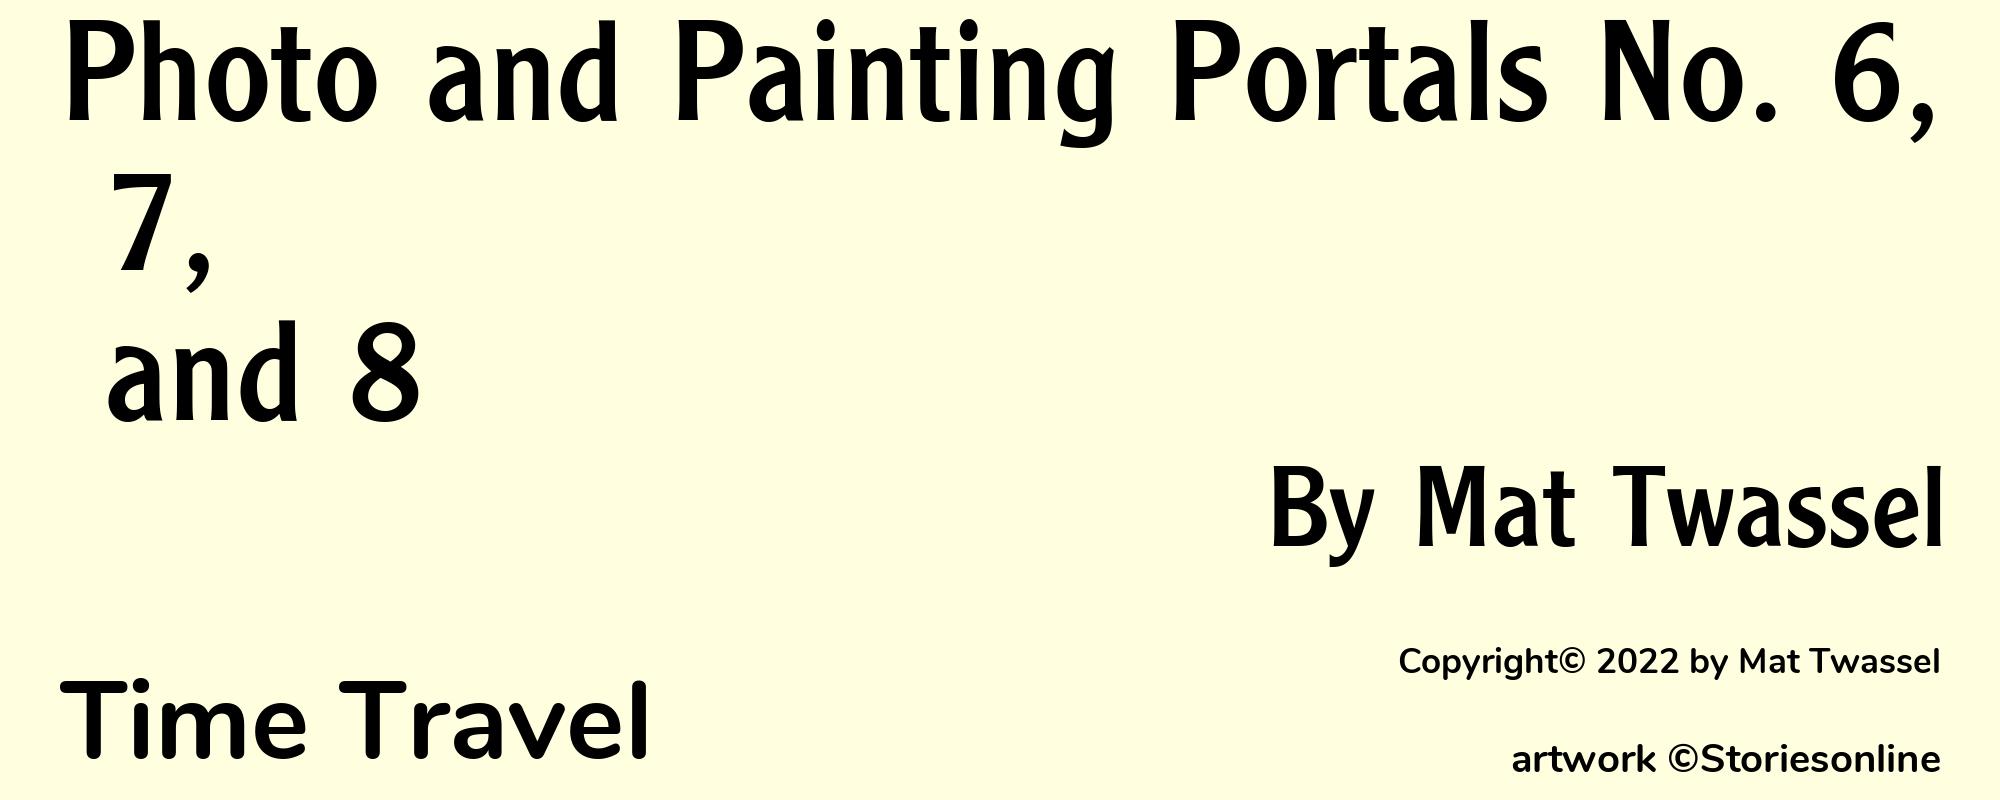 Photo and Painting Portals No. 6, 7, and 8 - Cover